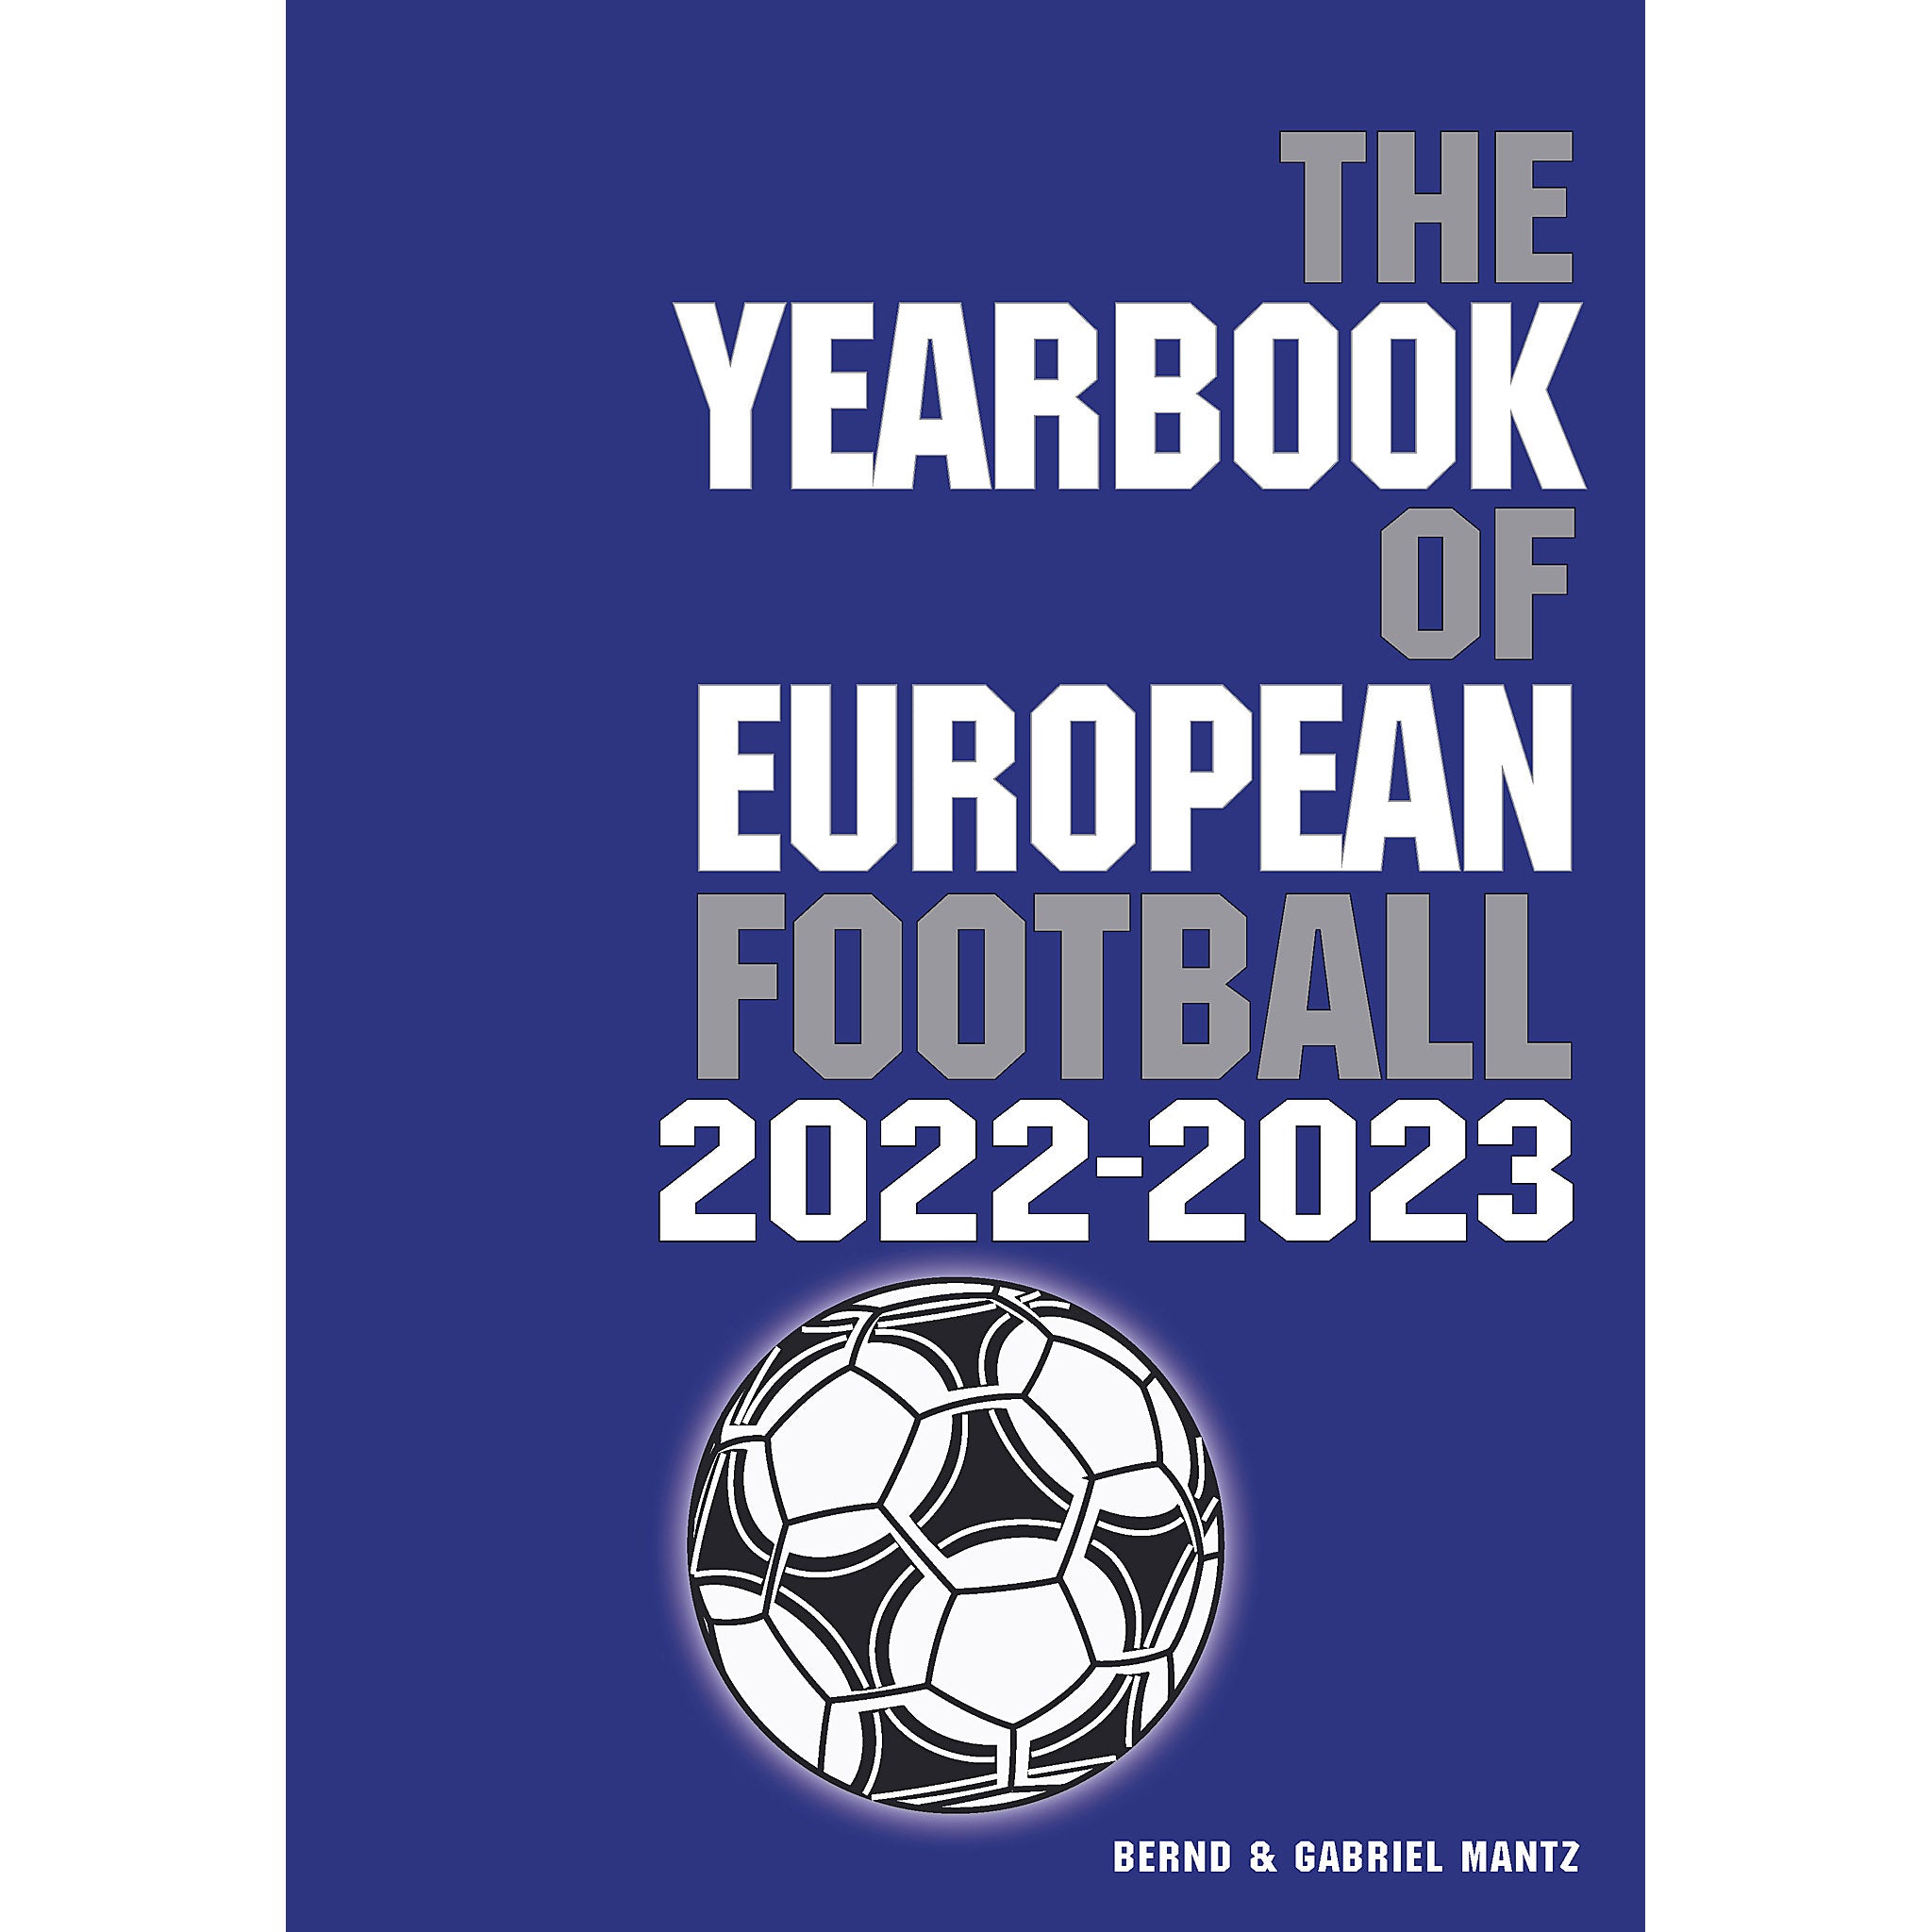 The Yearbook of European Football 2022-2023